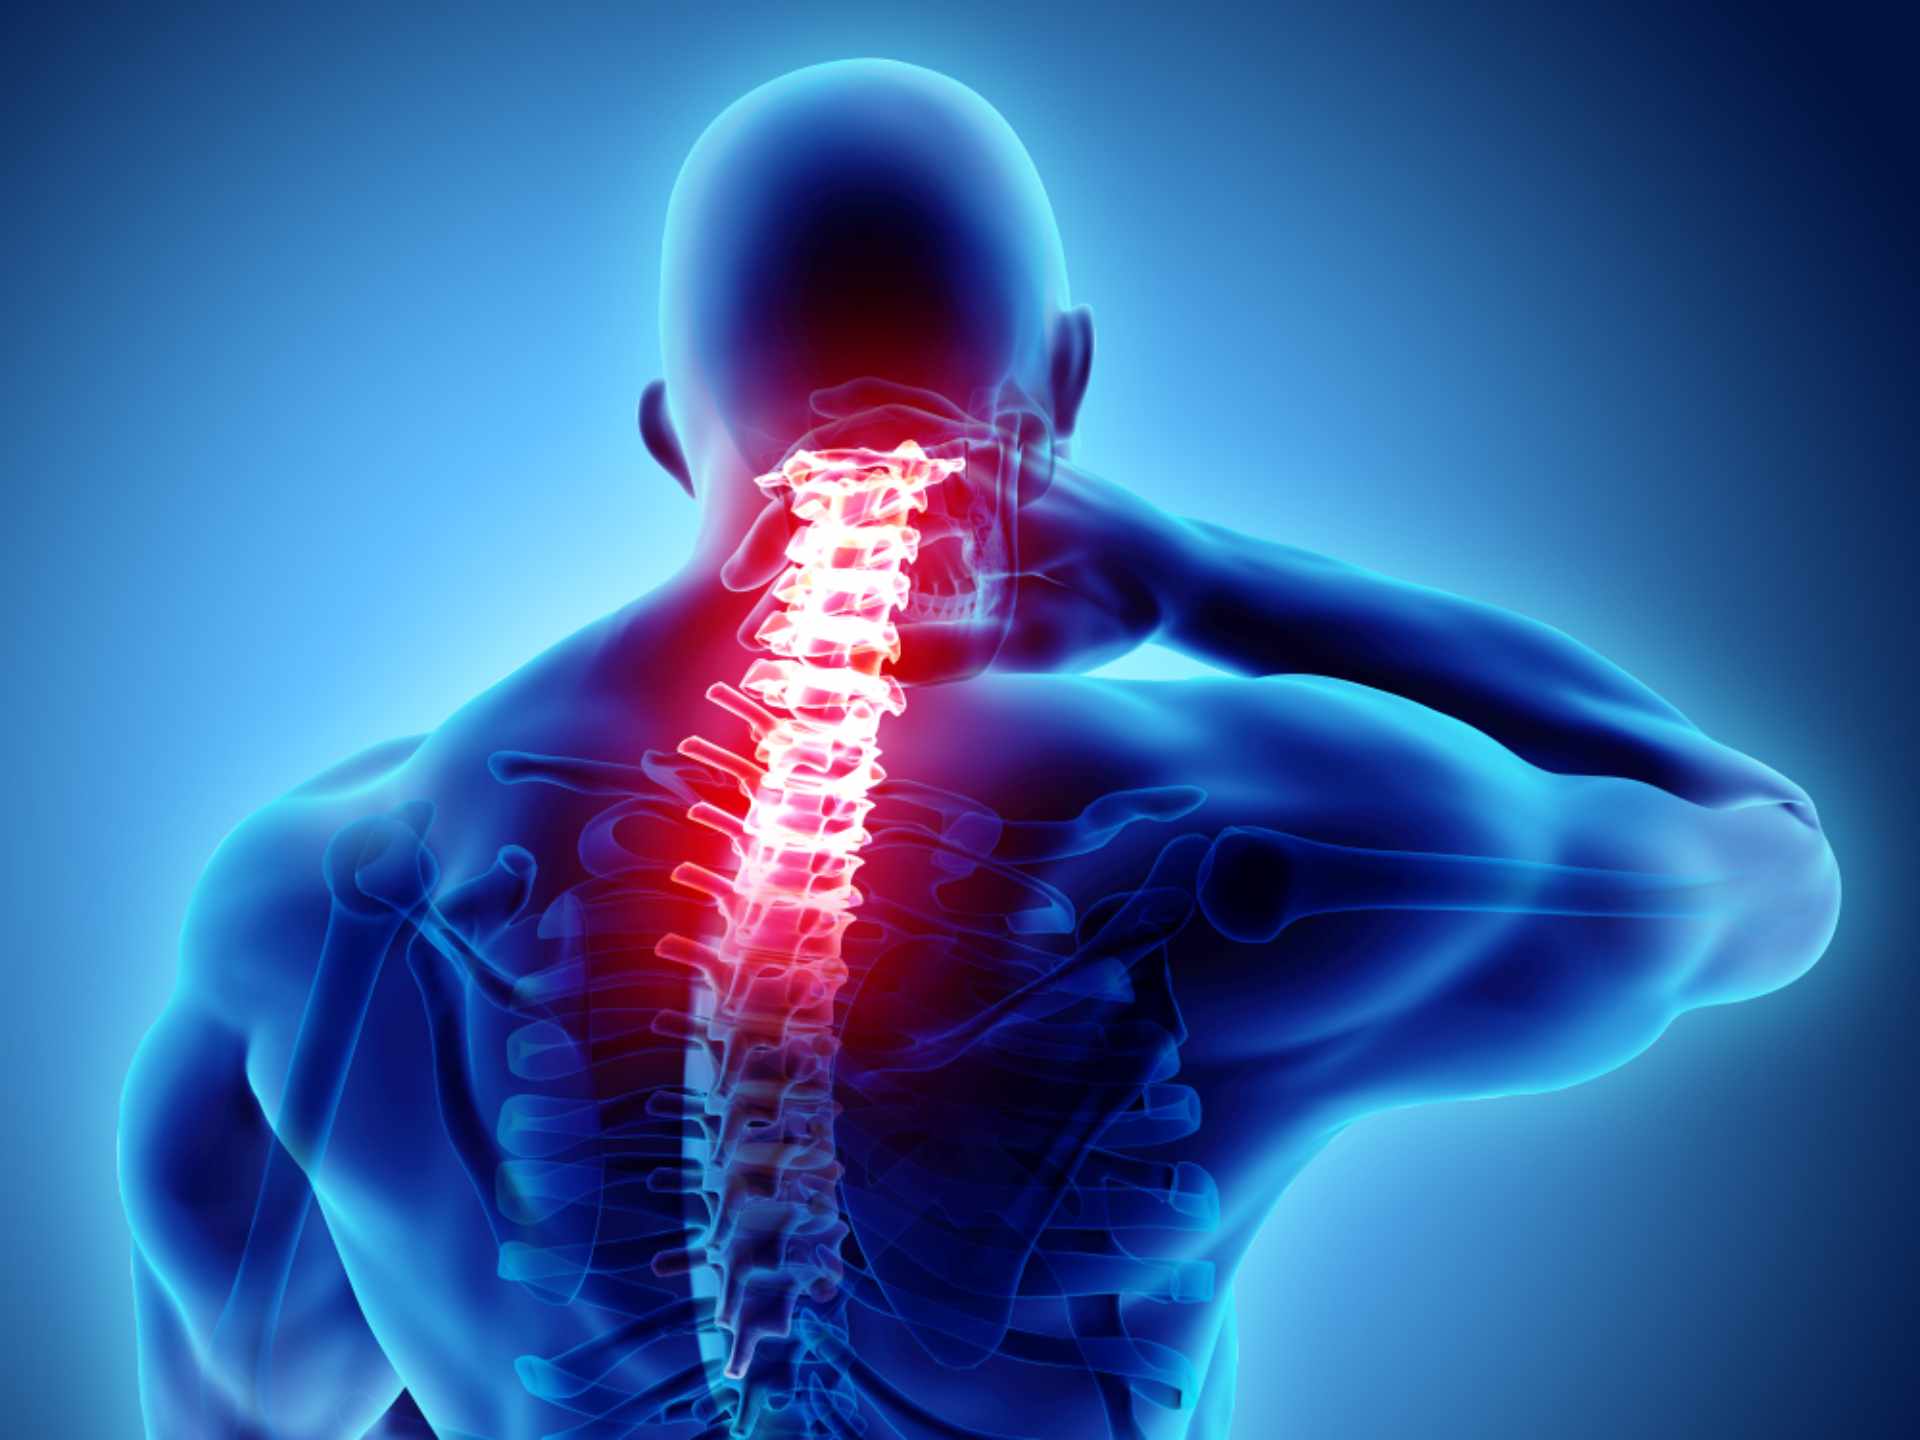 Neck Pain: Symptoms, Causes, and How to Treat It